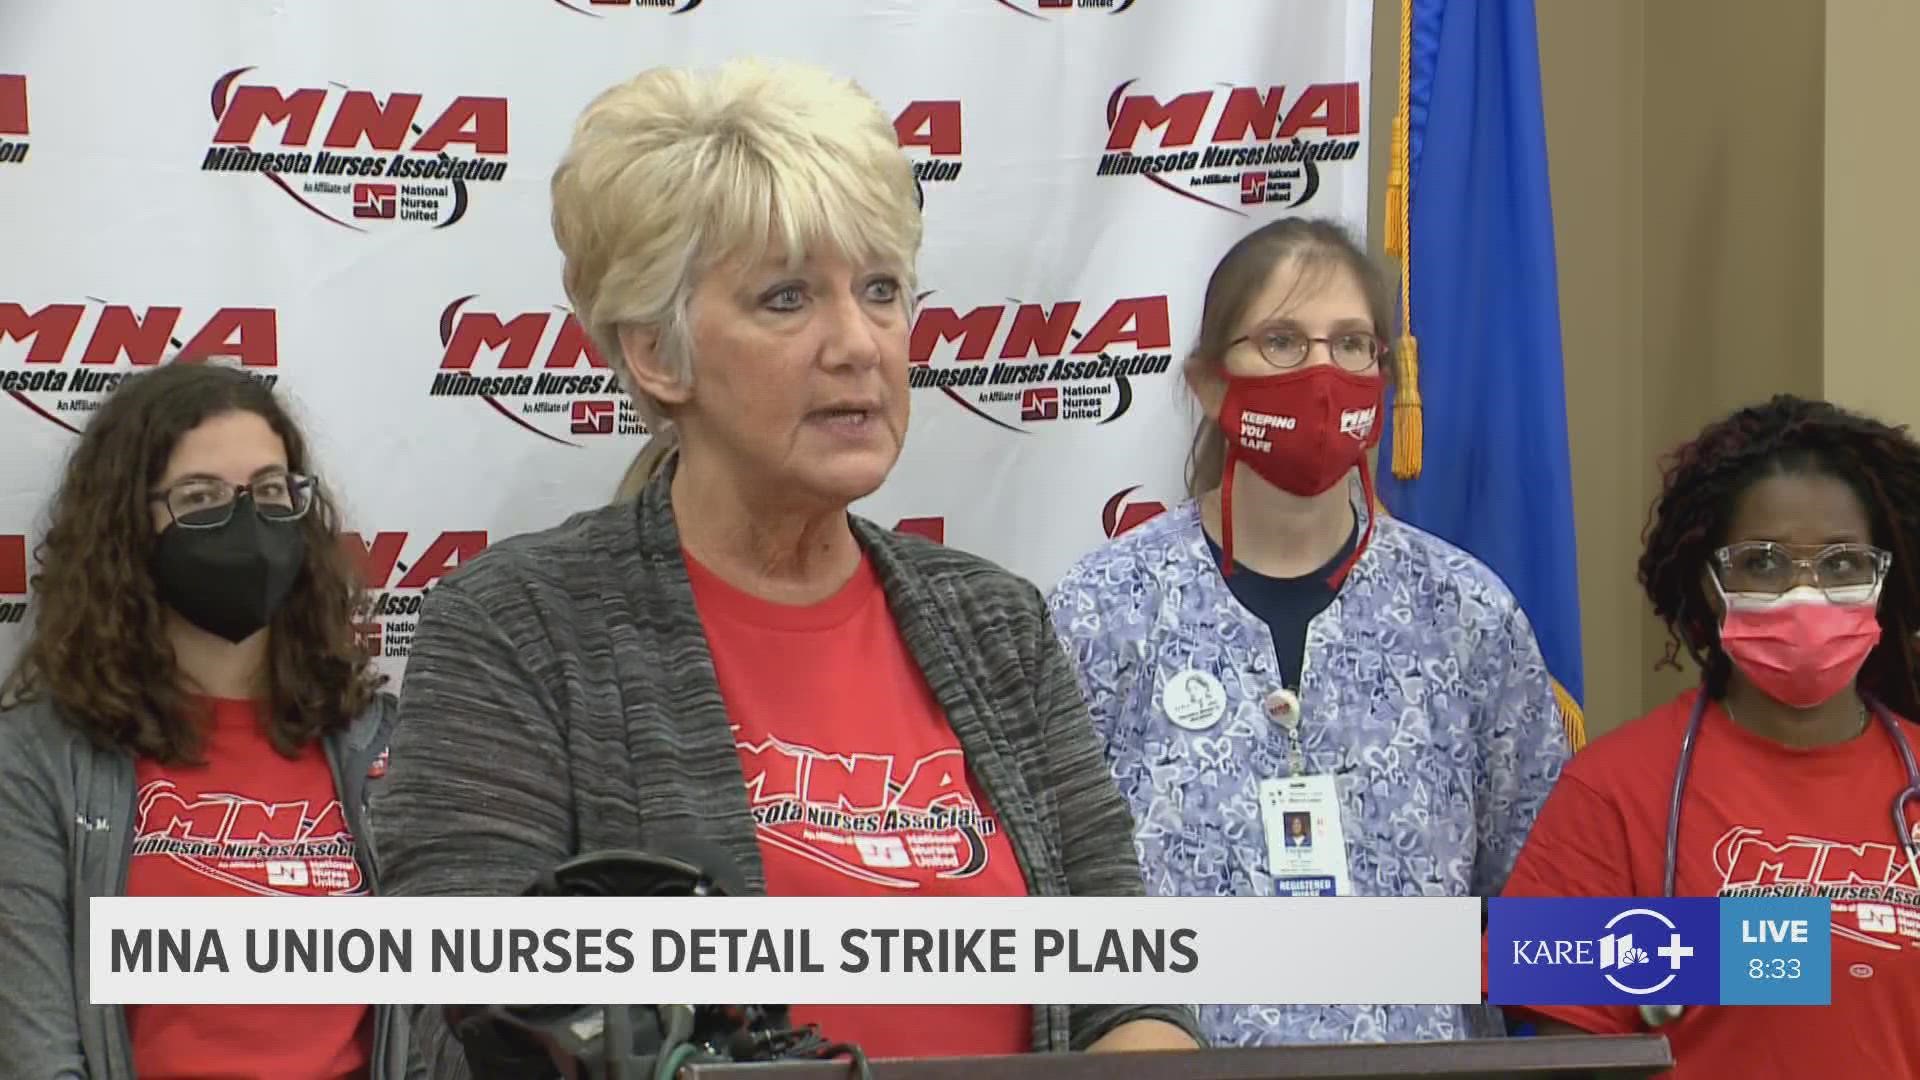 Union leaders and negotiators with the Minnesota Nurses Association discuss what they call an "overwhelming" vote to strike, and what comes next.